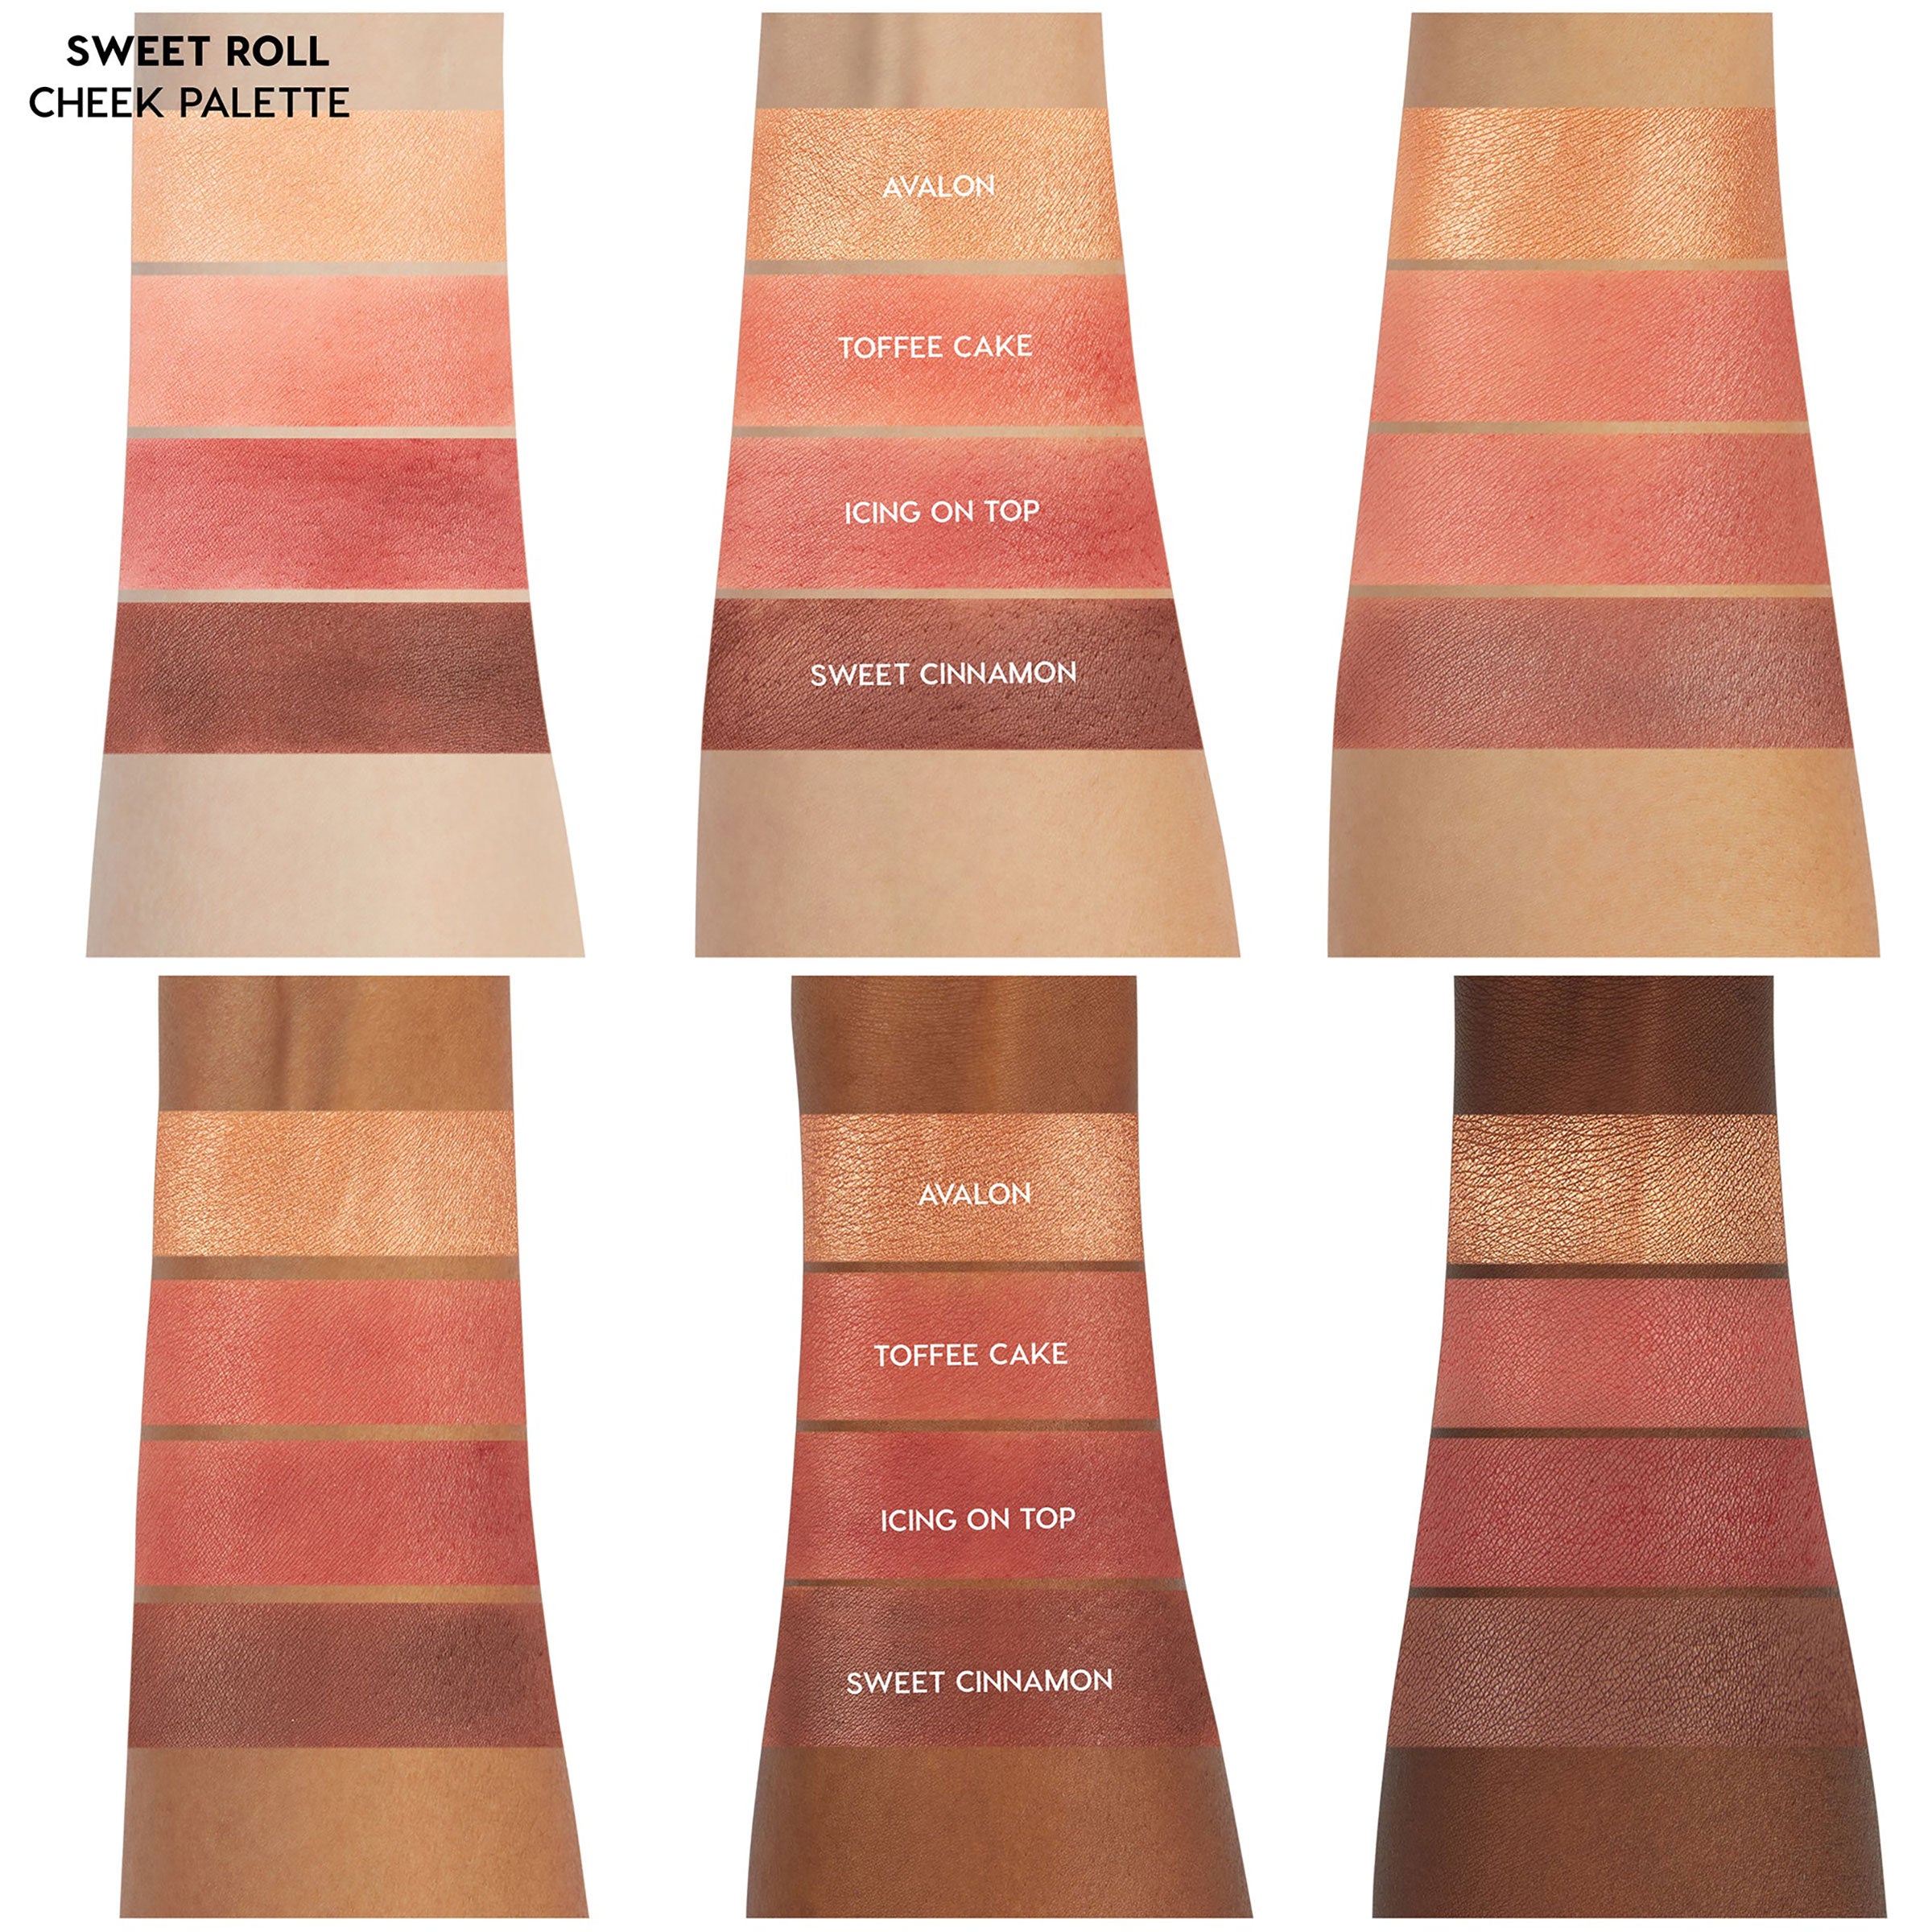 ColourPop Sweet Roll warm bronze and red blush quad arm swatches